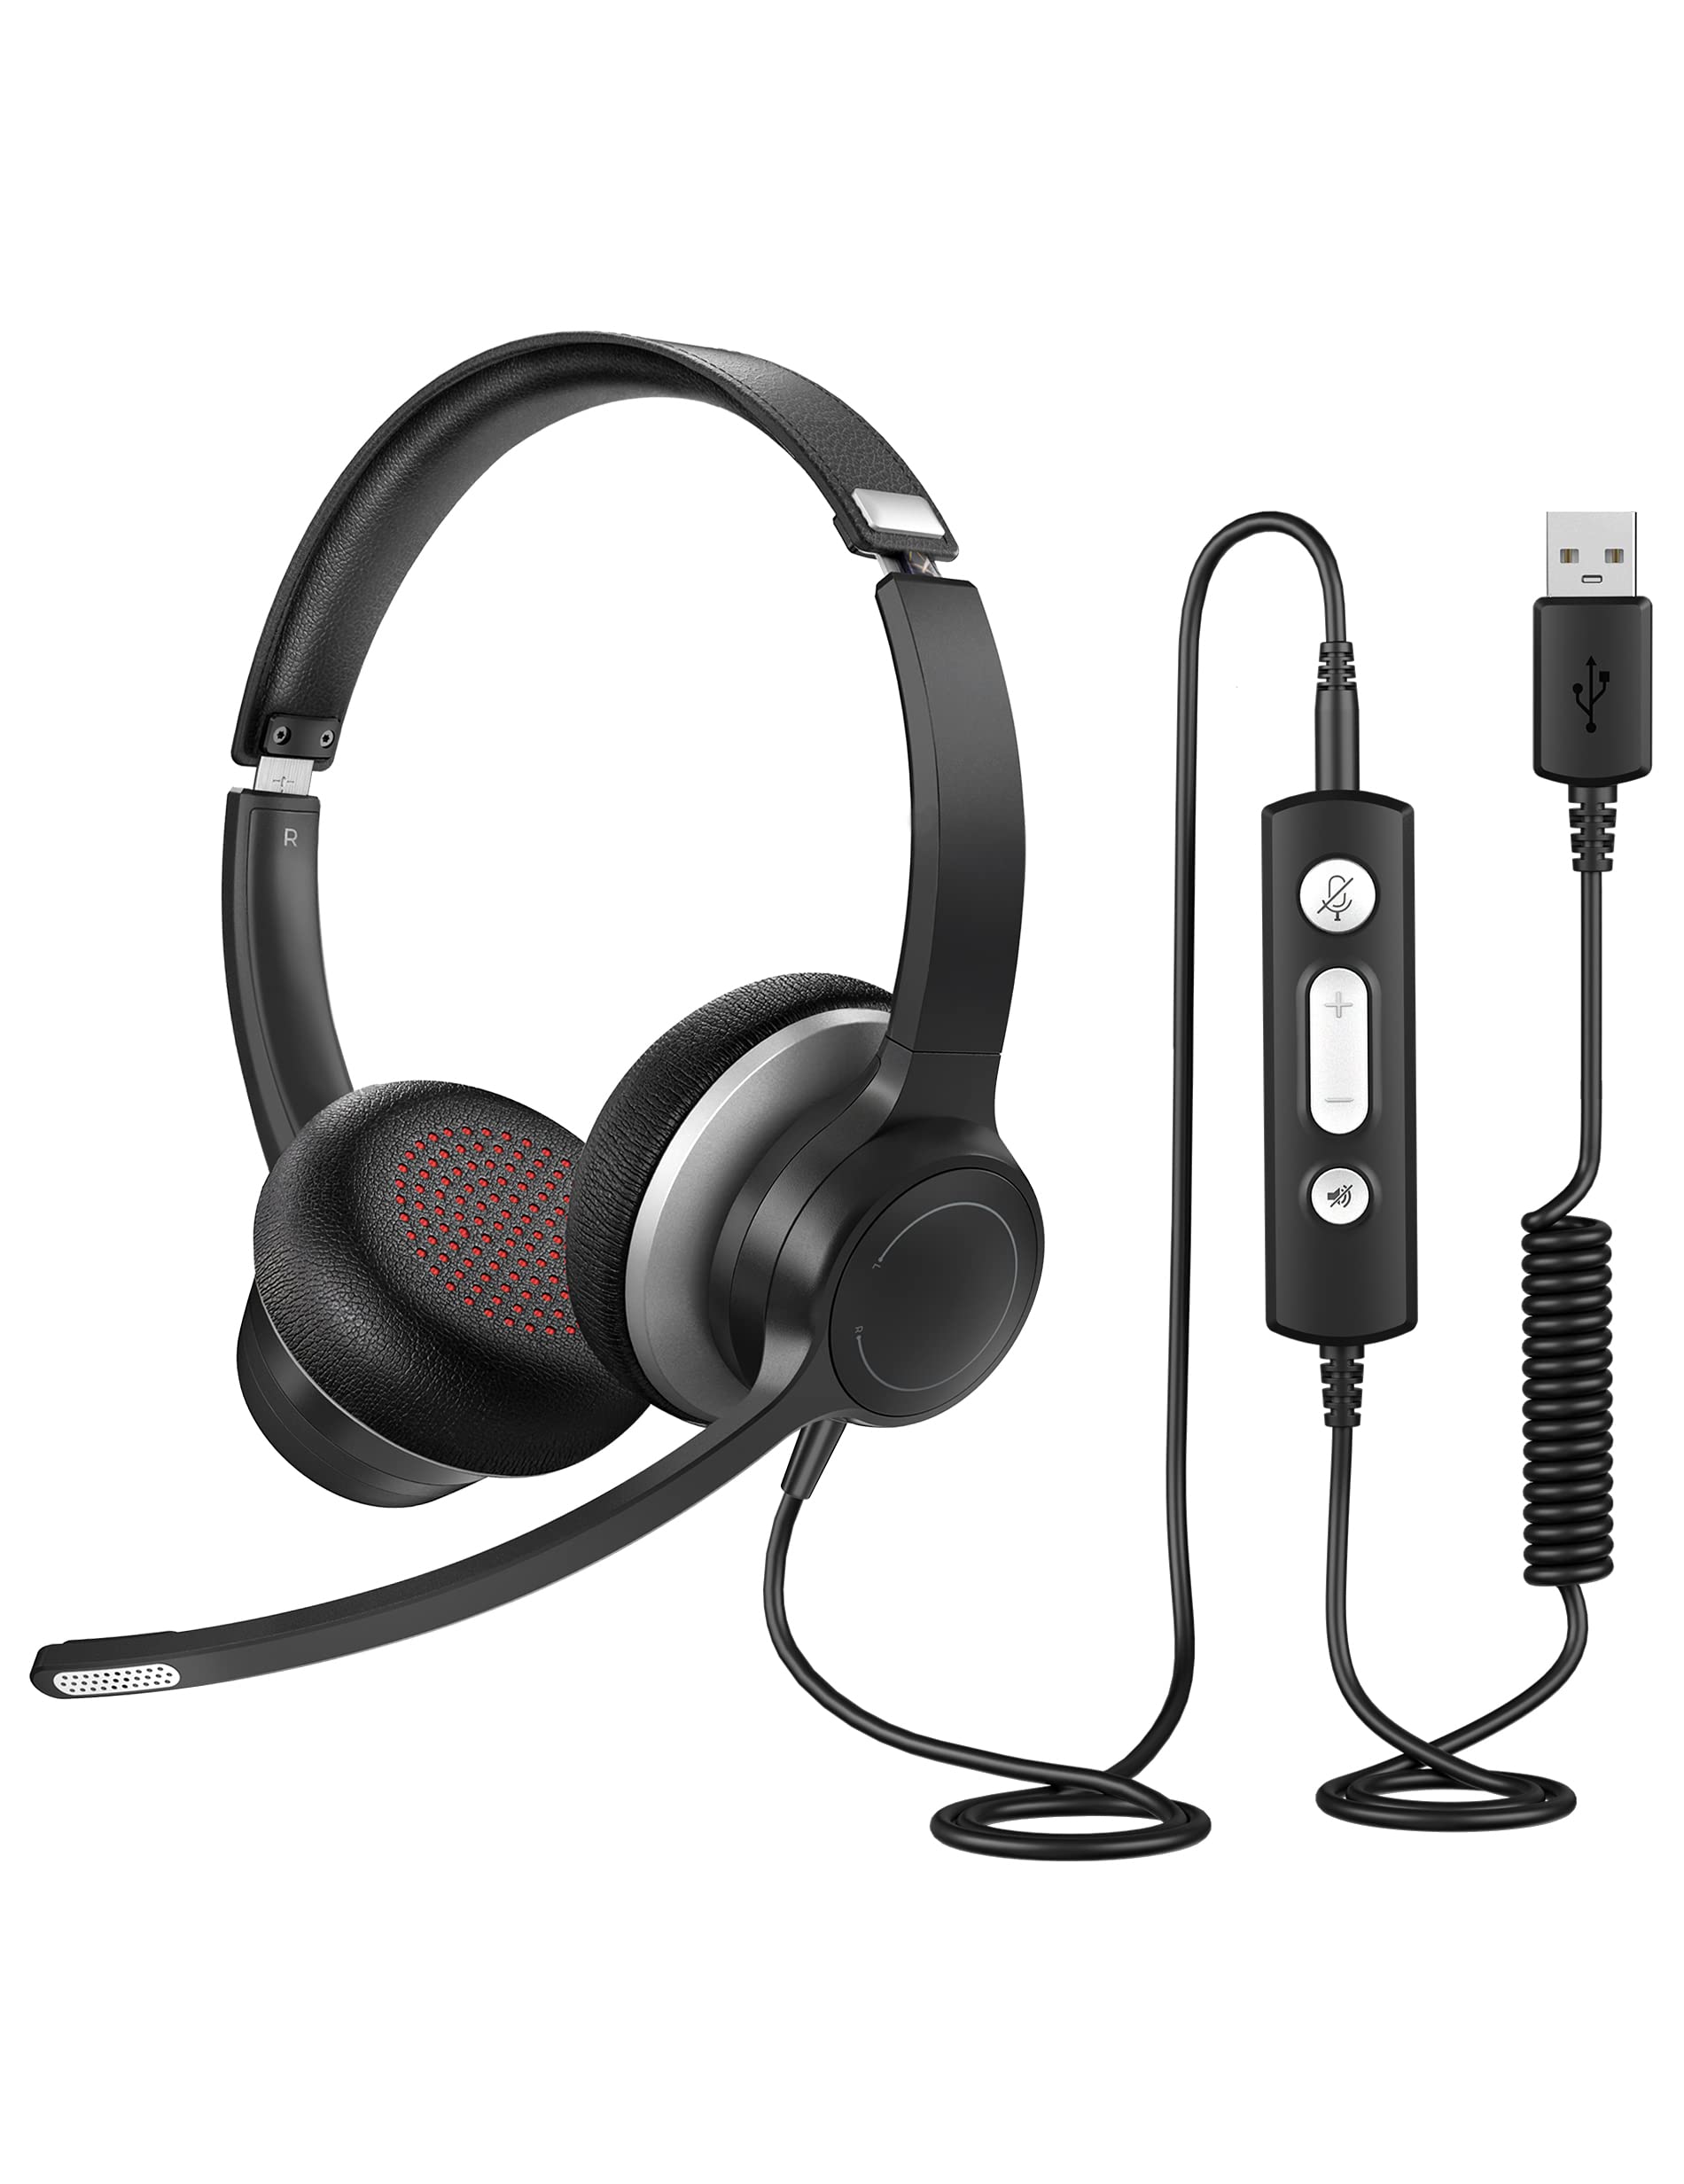 Besreath PC Headsets with Microphone, Stereo Computer Headset for Laptop, 3.5mm/USB Business Office Headsets Headphones In-Line Control USB Wired Headset for Skype ZOOM PC Webinar, Cell Phone